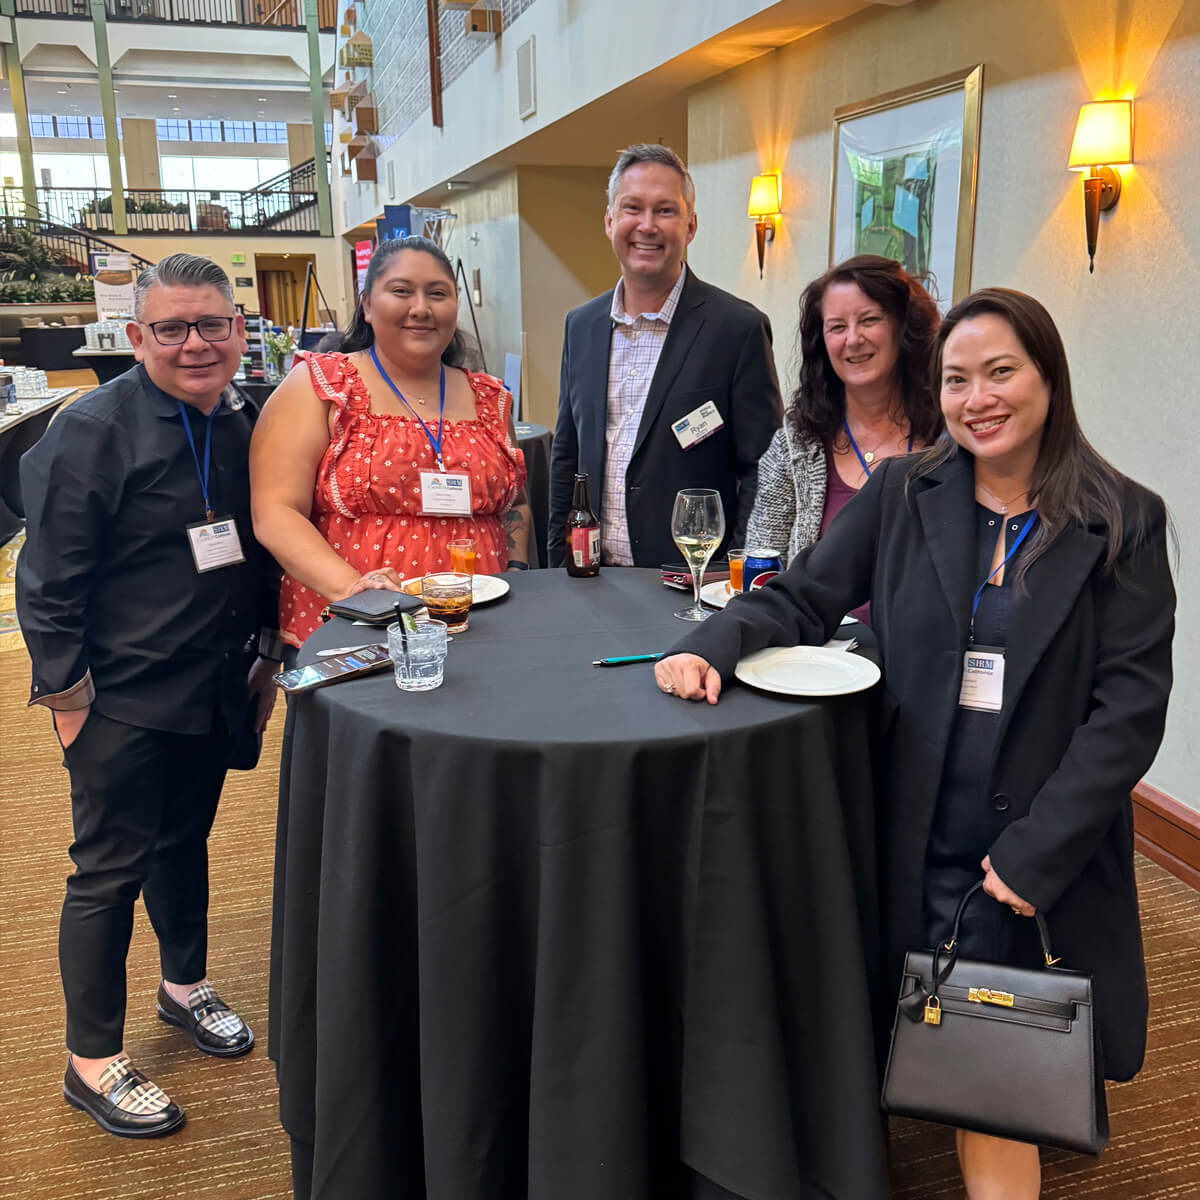 📸 What an unforgettable time we had at the CalSHRM Conference last week! 🌟 Whether at Eric and Tara's Return to Work presentation, our happy hour at the Sheraton Grand, or the MS&A booth, it was wonderful to connect with all of you! 🙌
#CalSHRM #SHRM #EmploymentLaw #TeamRhino